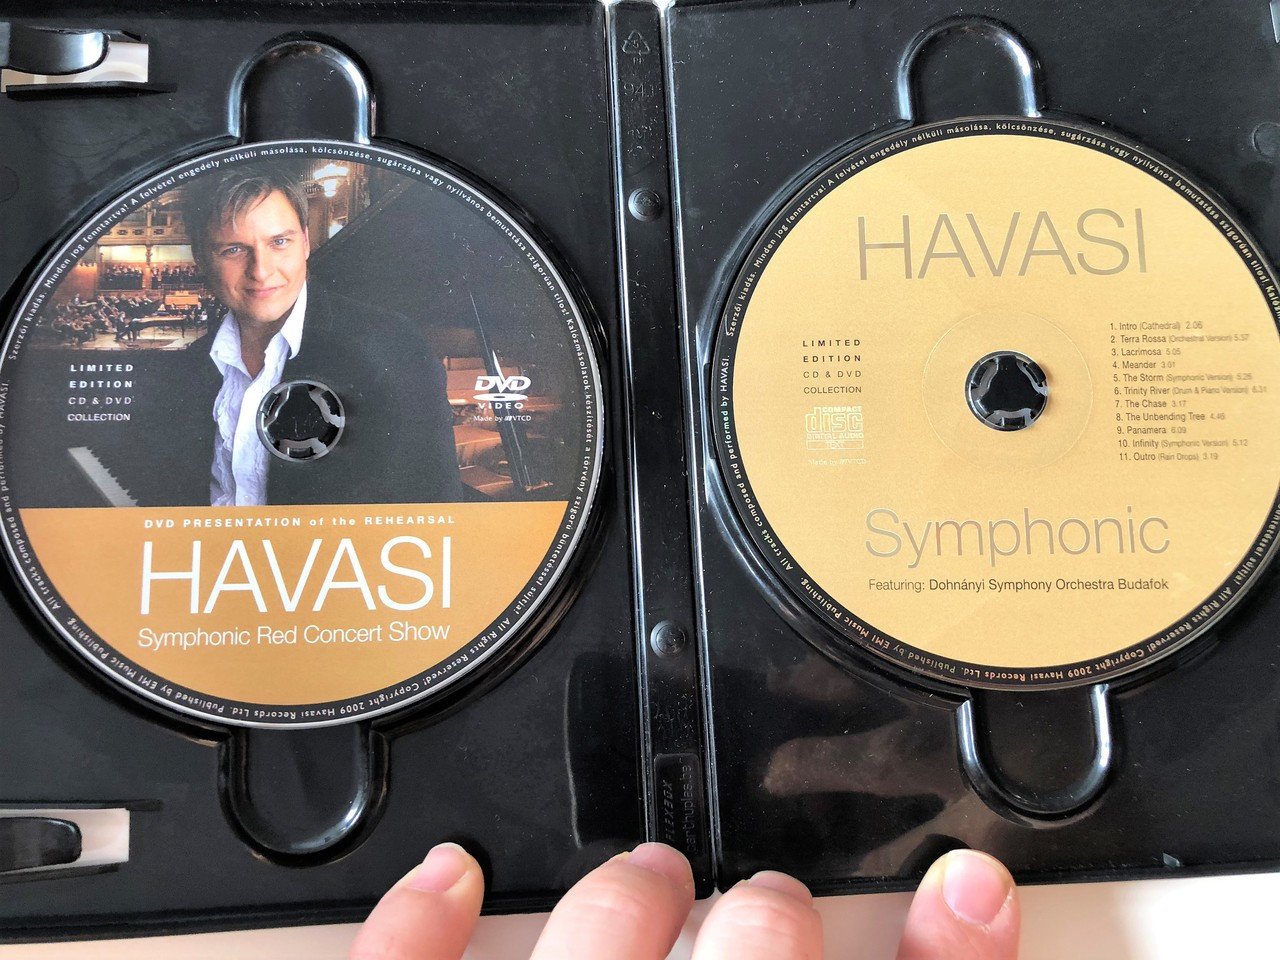 Havasi Balázs: Symphonic Red Concert Show LIMITED EDITION CD & DVD / The  Fastest Pianist of the World - bibleinmylanguage